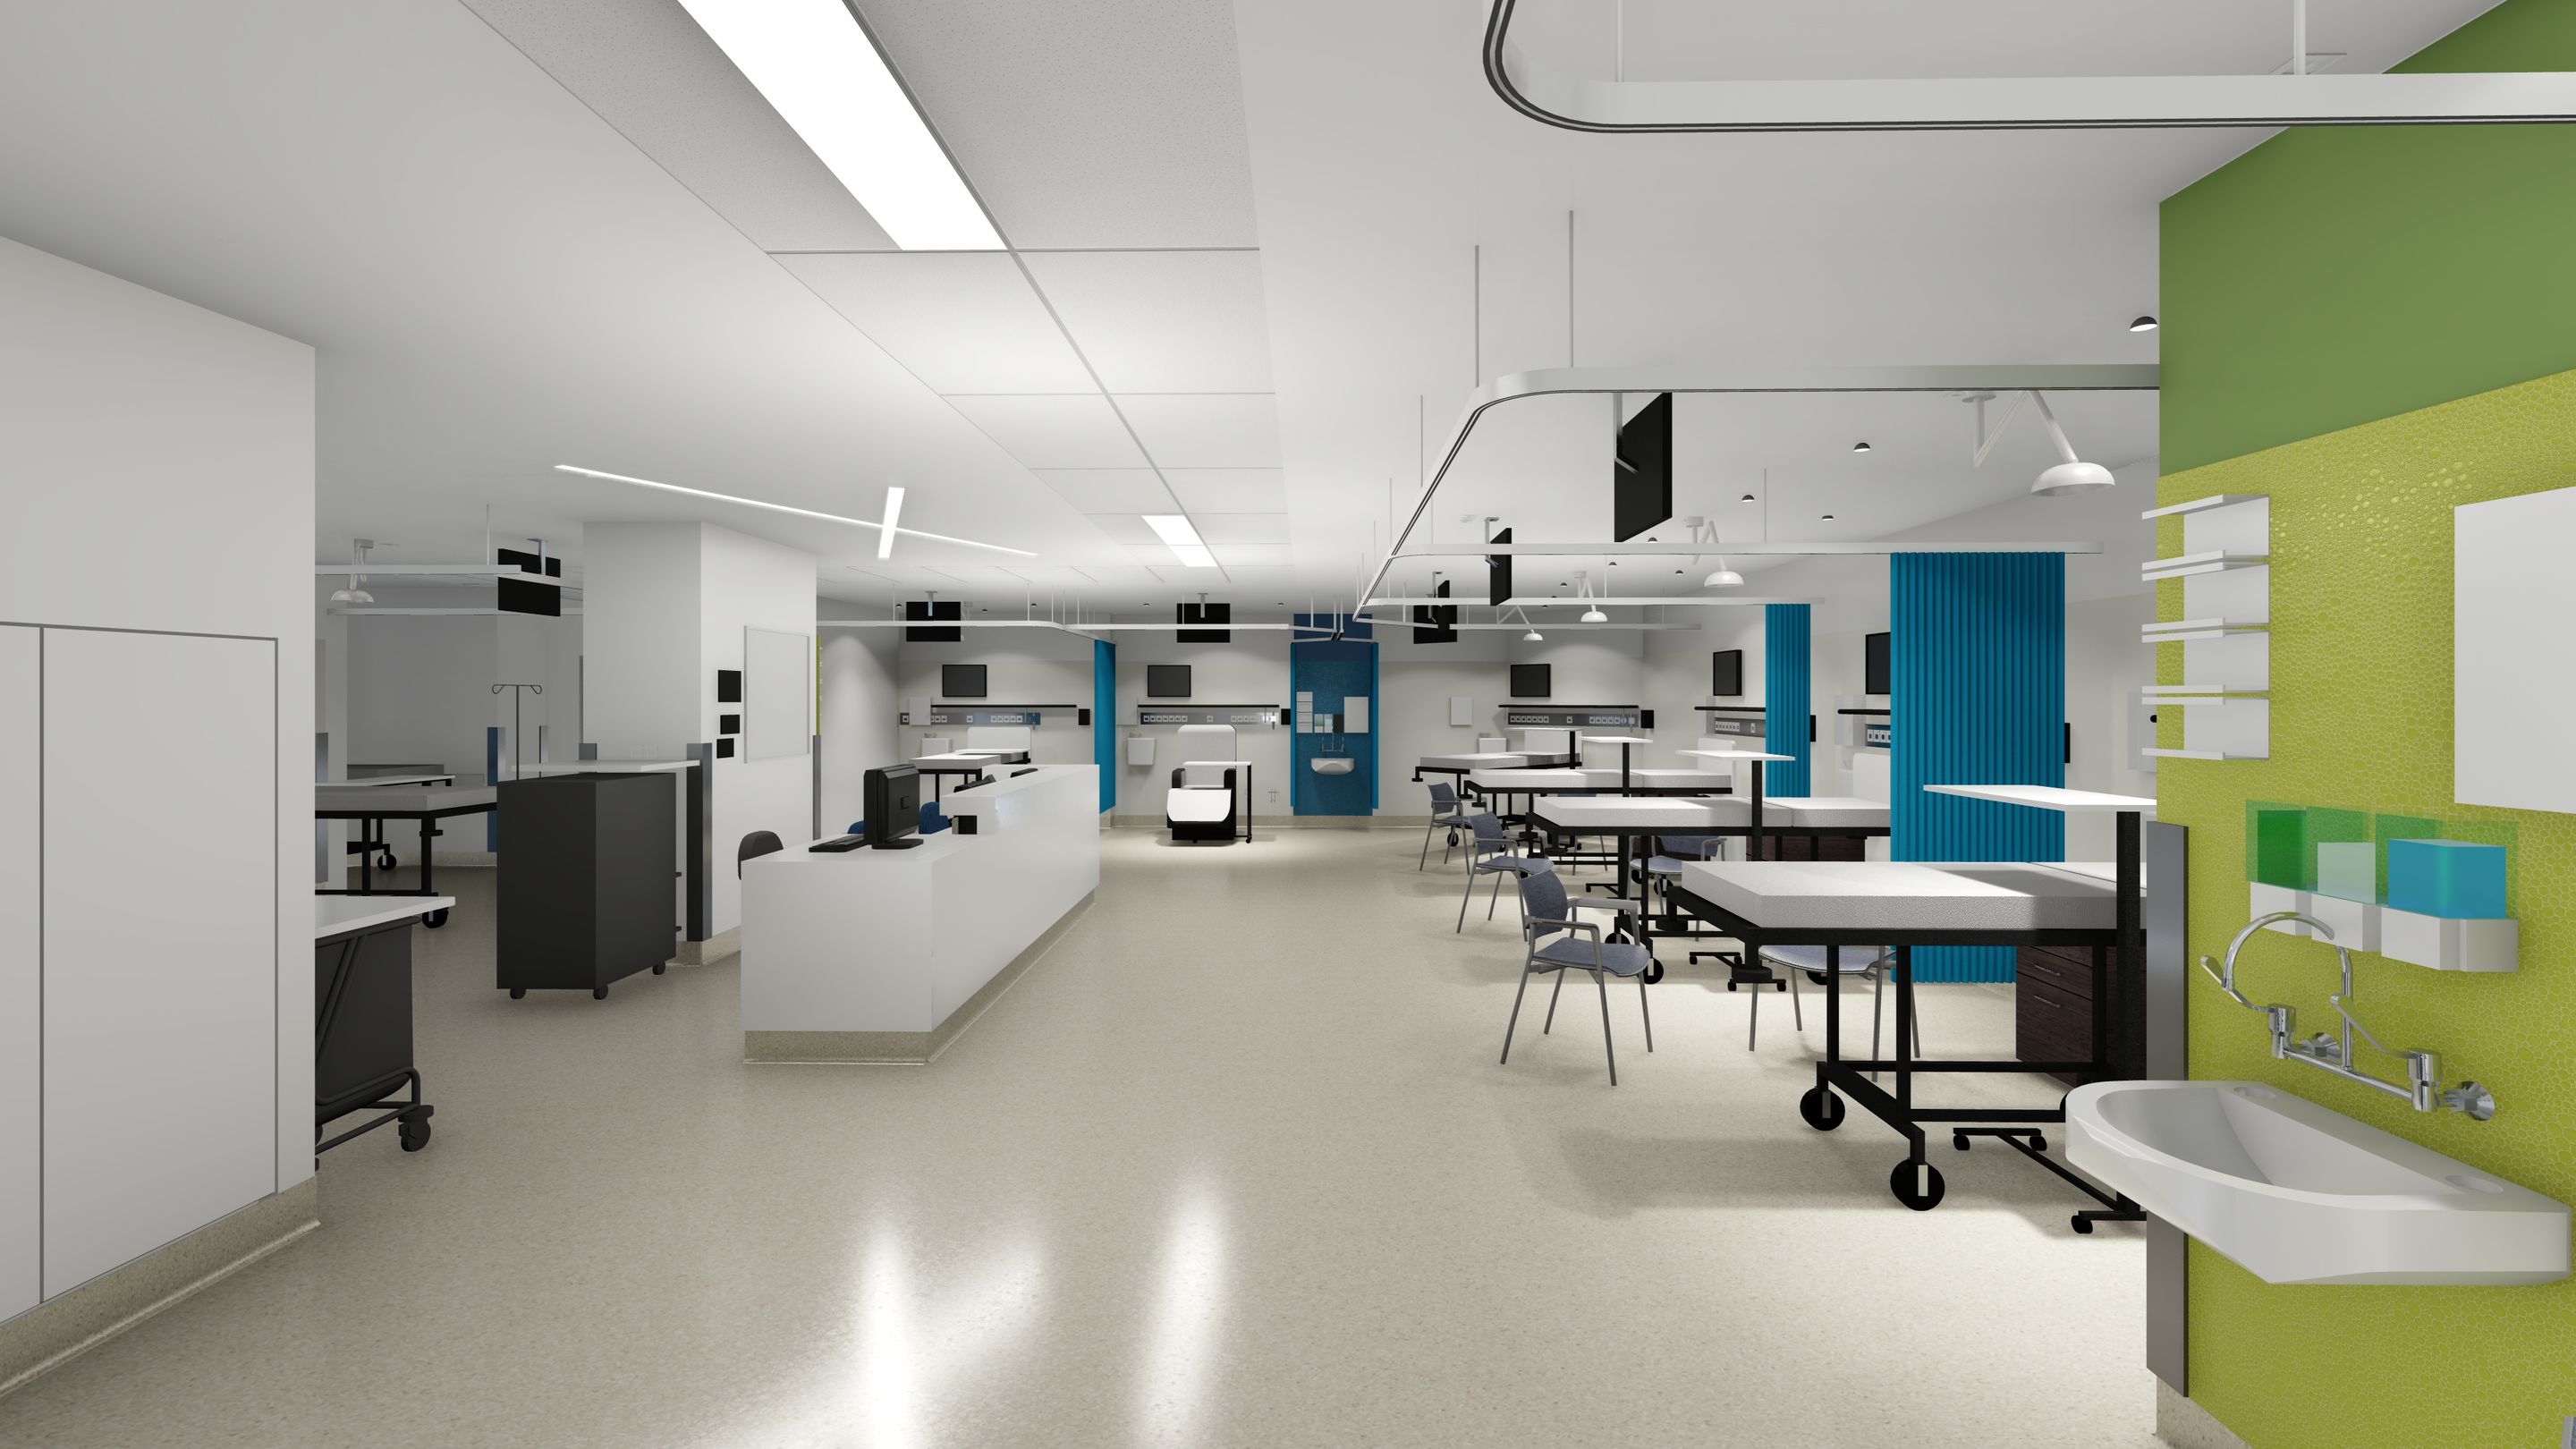 The Memorial Hospital Paediatric Recovery Unit designed by Hodgkison Architects Adelaide